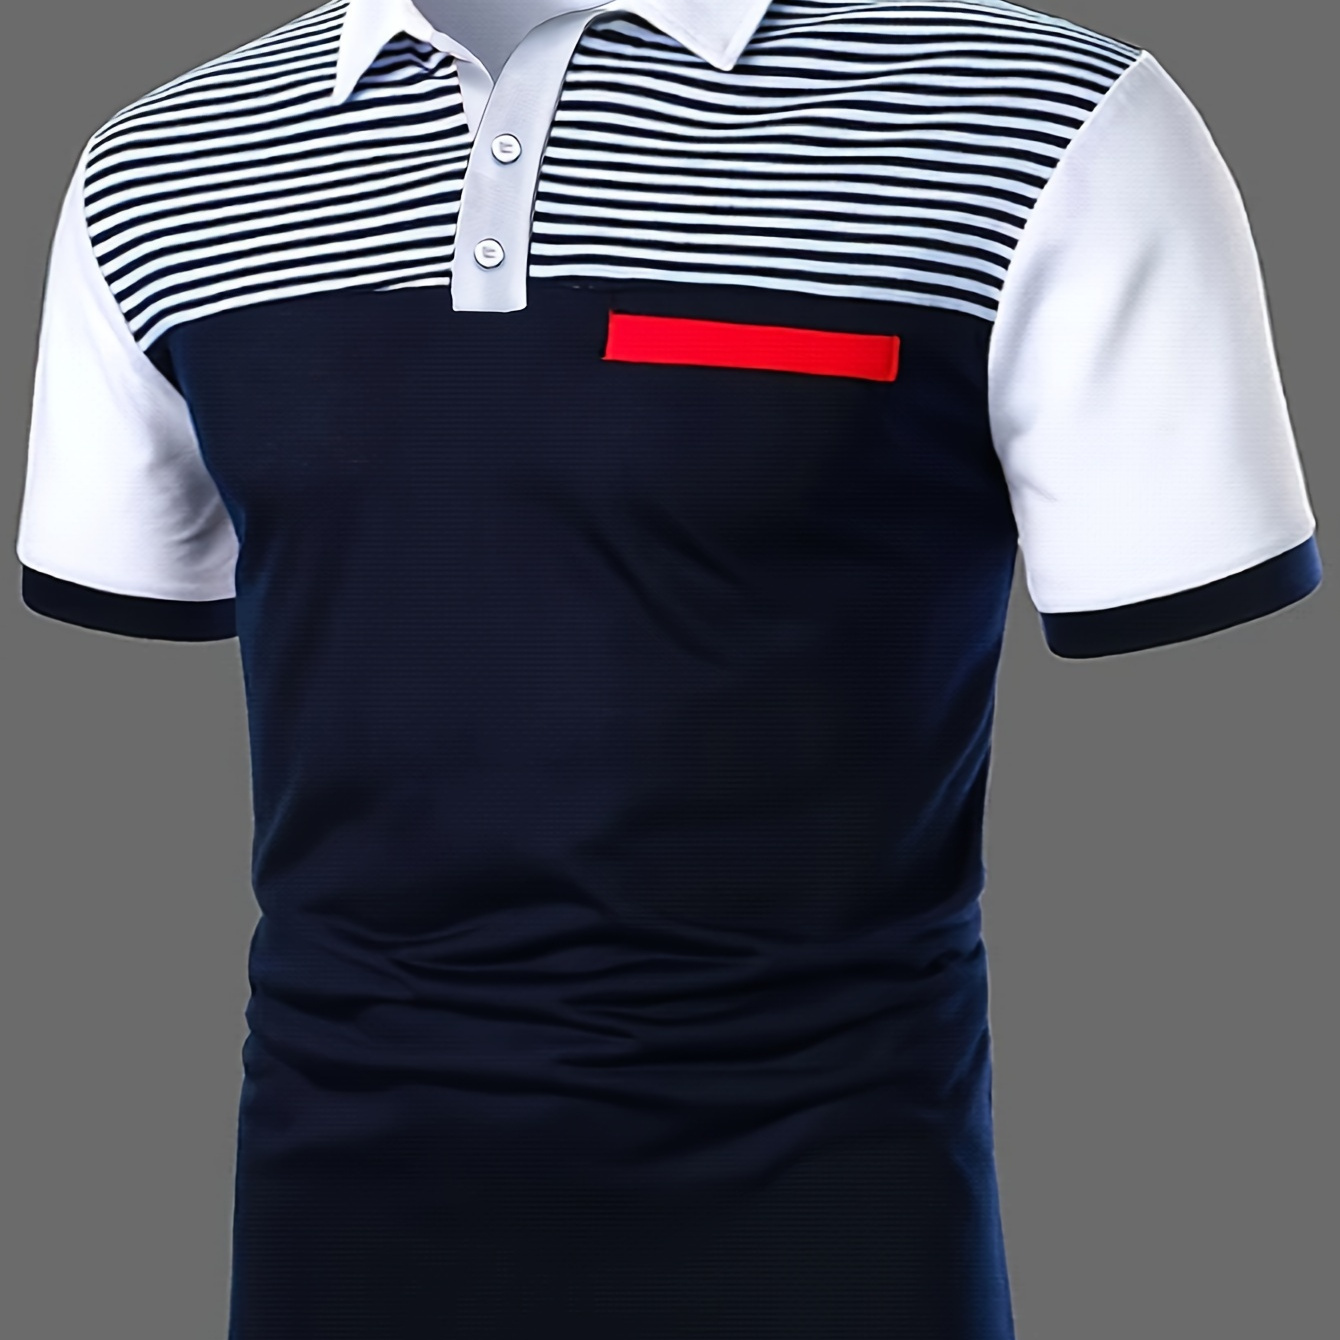 

Men's Stripes Graphic Print Golf T-shirt For Summer, Trendy Casual Short Sleeve Tennis Tees